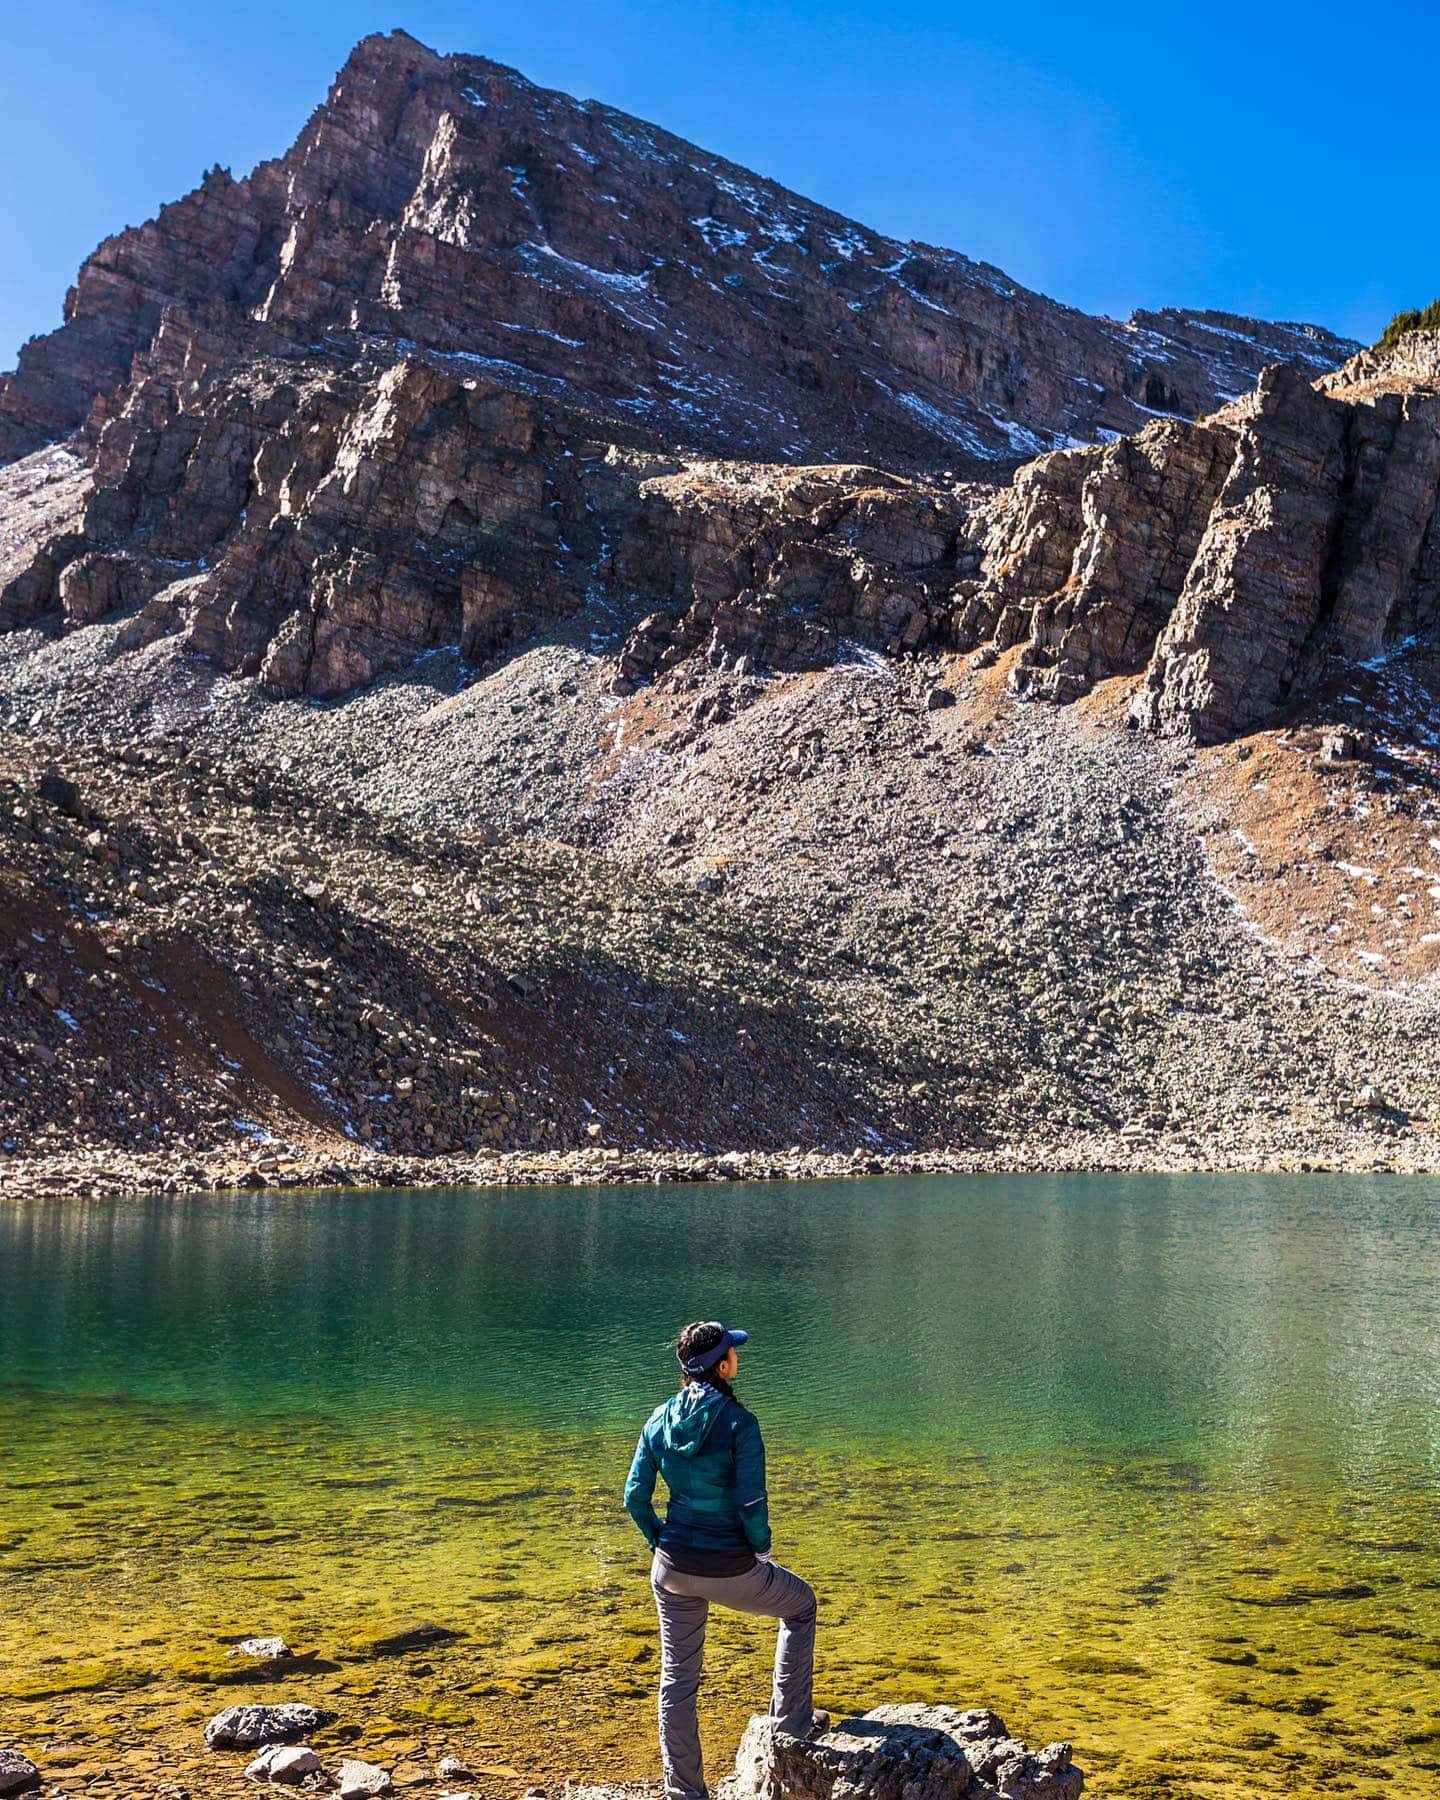 Let the 2021 adventure begin! Swipe to see a video of this gorgeous alpine lake! 😍 (this was one of the only trips we took in 2020. the main activity was long mountain hikes)  I am so excited for this year! I signed up for my first triathlon!! Exactly 100 days to race day! I’m doing a half Ironman in Galveston, Texas on April 11th! Wish me luck on my training!  What are you looking forward to this year?! 
.
.
.
.
#coloradophotography #coloradohiking #cathedrallake #outdooradventures #usatravel #hikecolorado #alpinelake #mountainscapes #mountainviews #tlpics #womenwhohike #naturephotograpy #naturelover #naturegeography #bestphotos